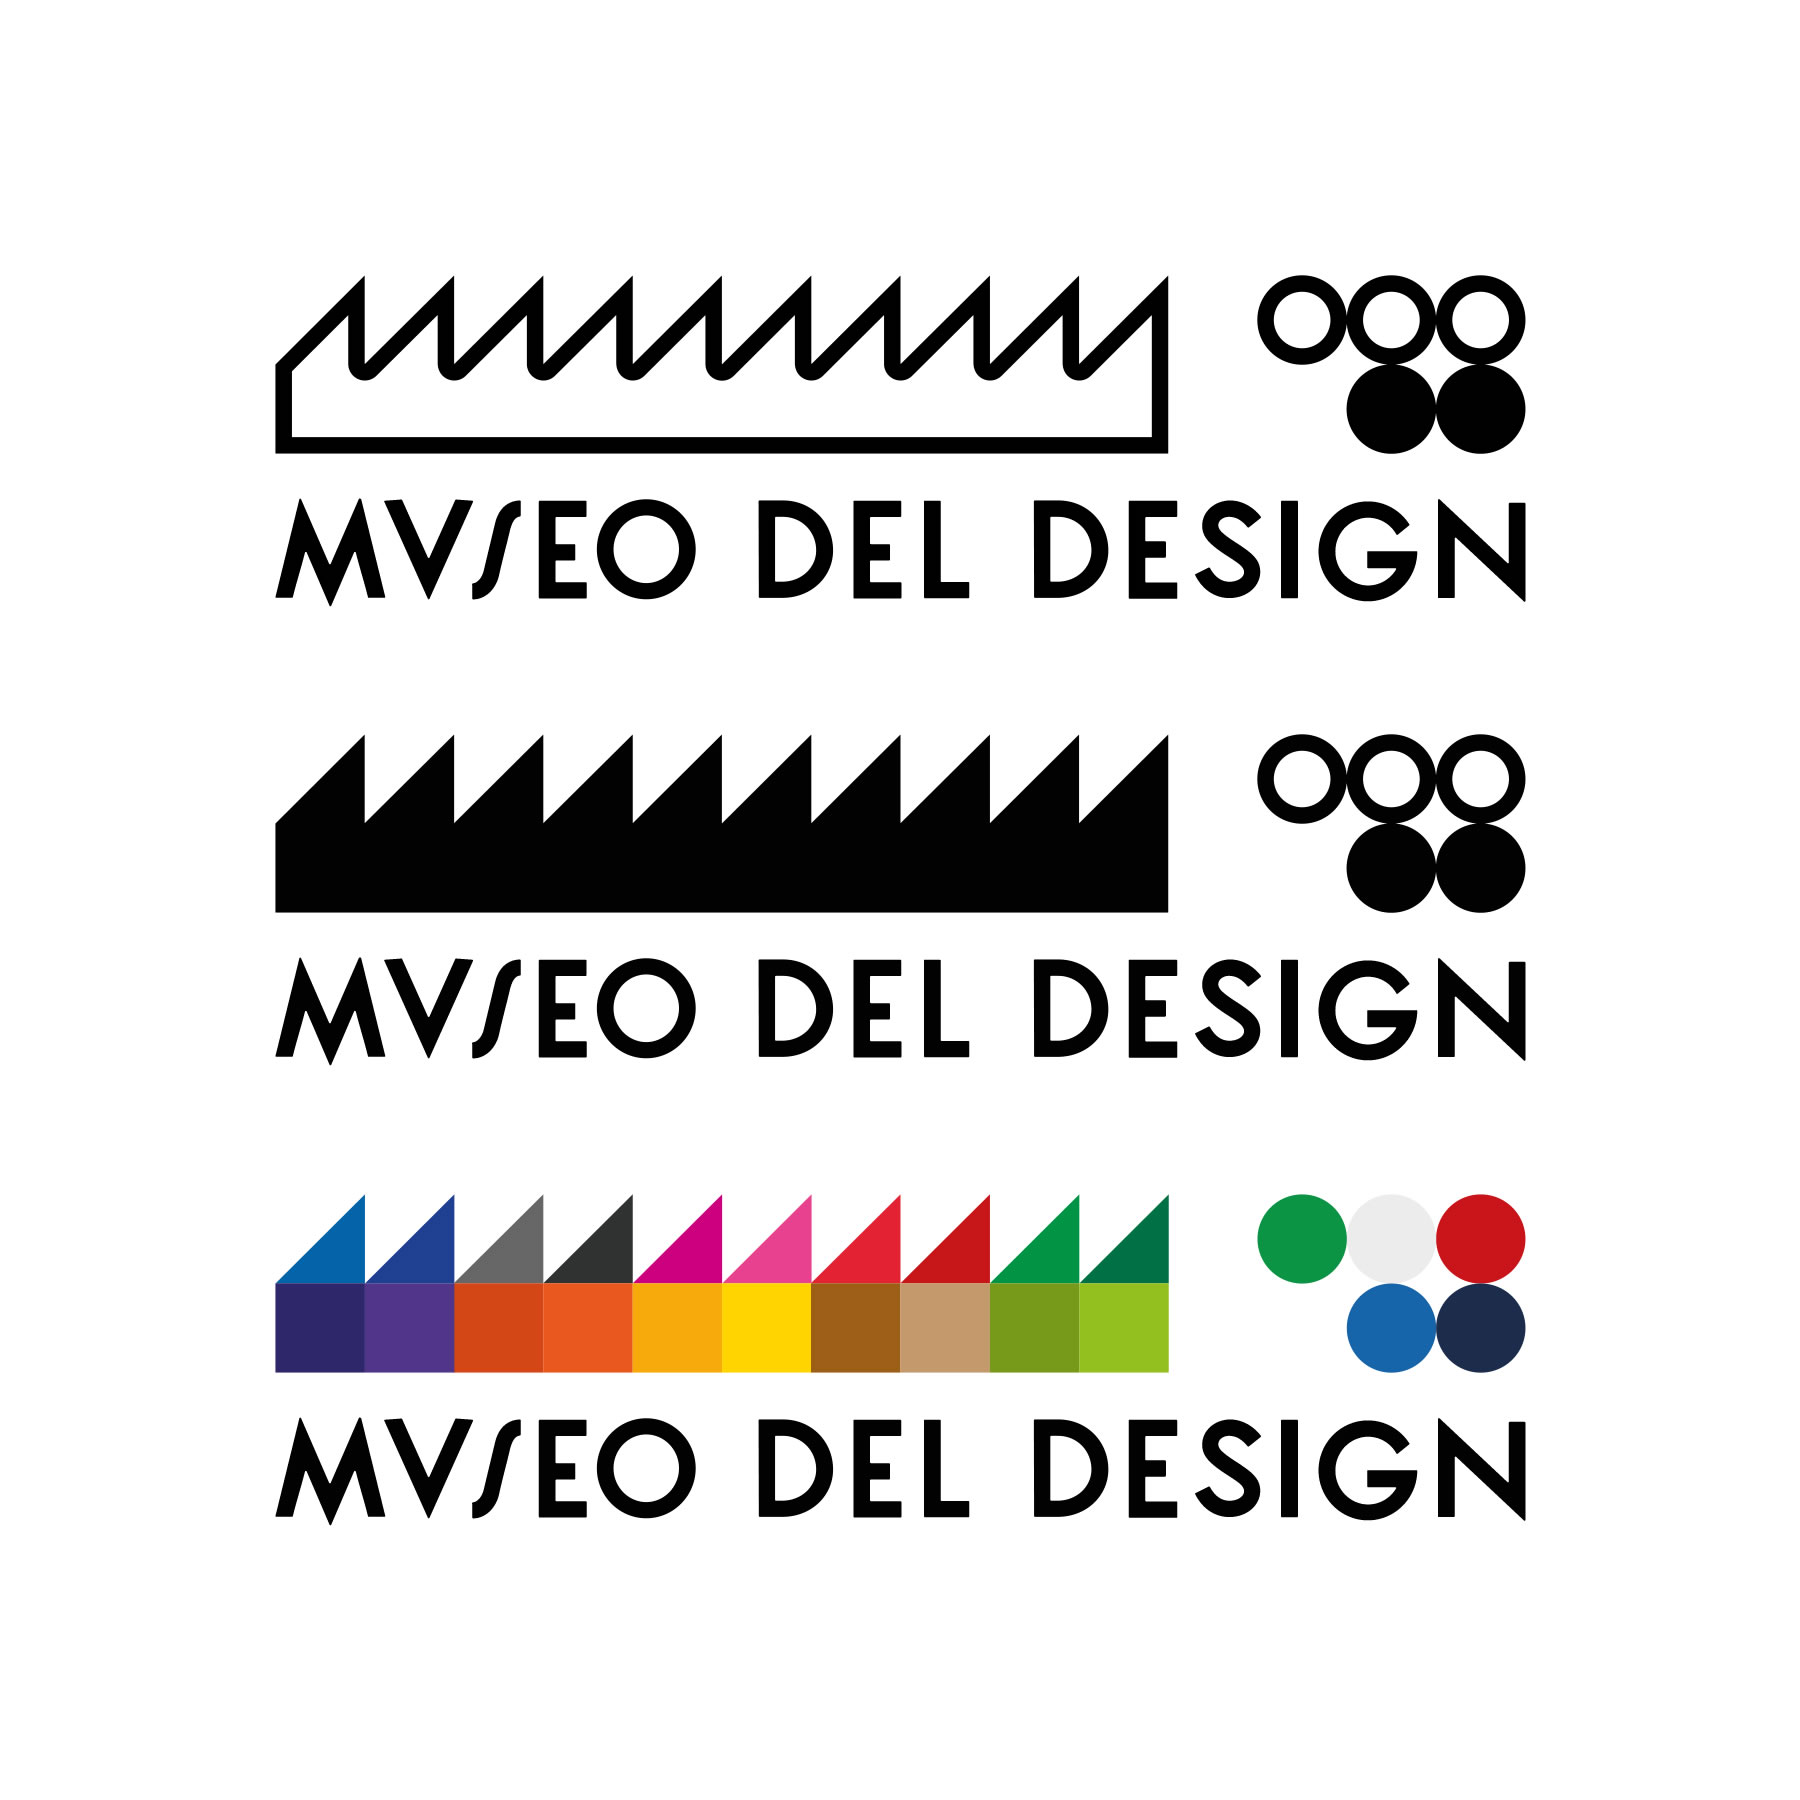 logo variations of the Museo del Design